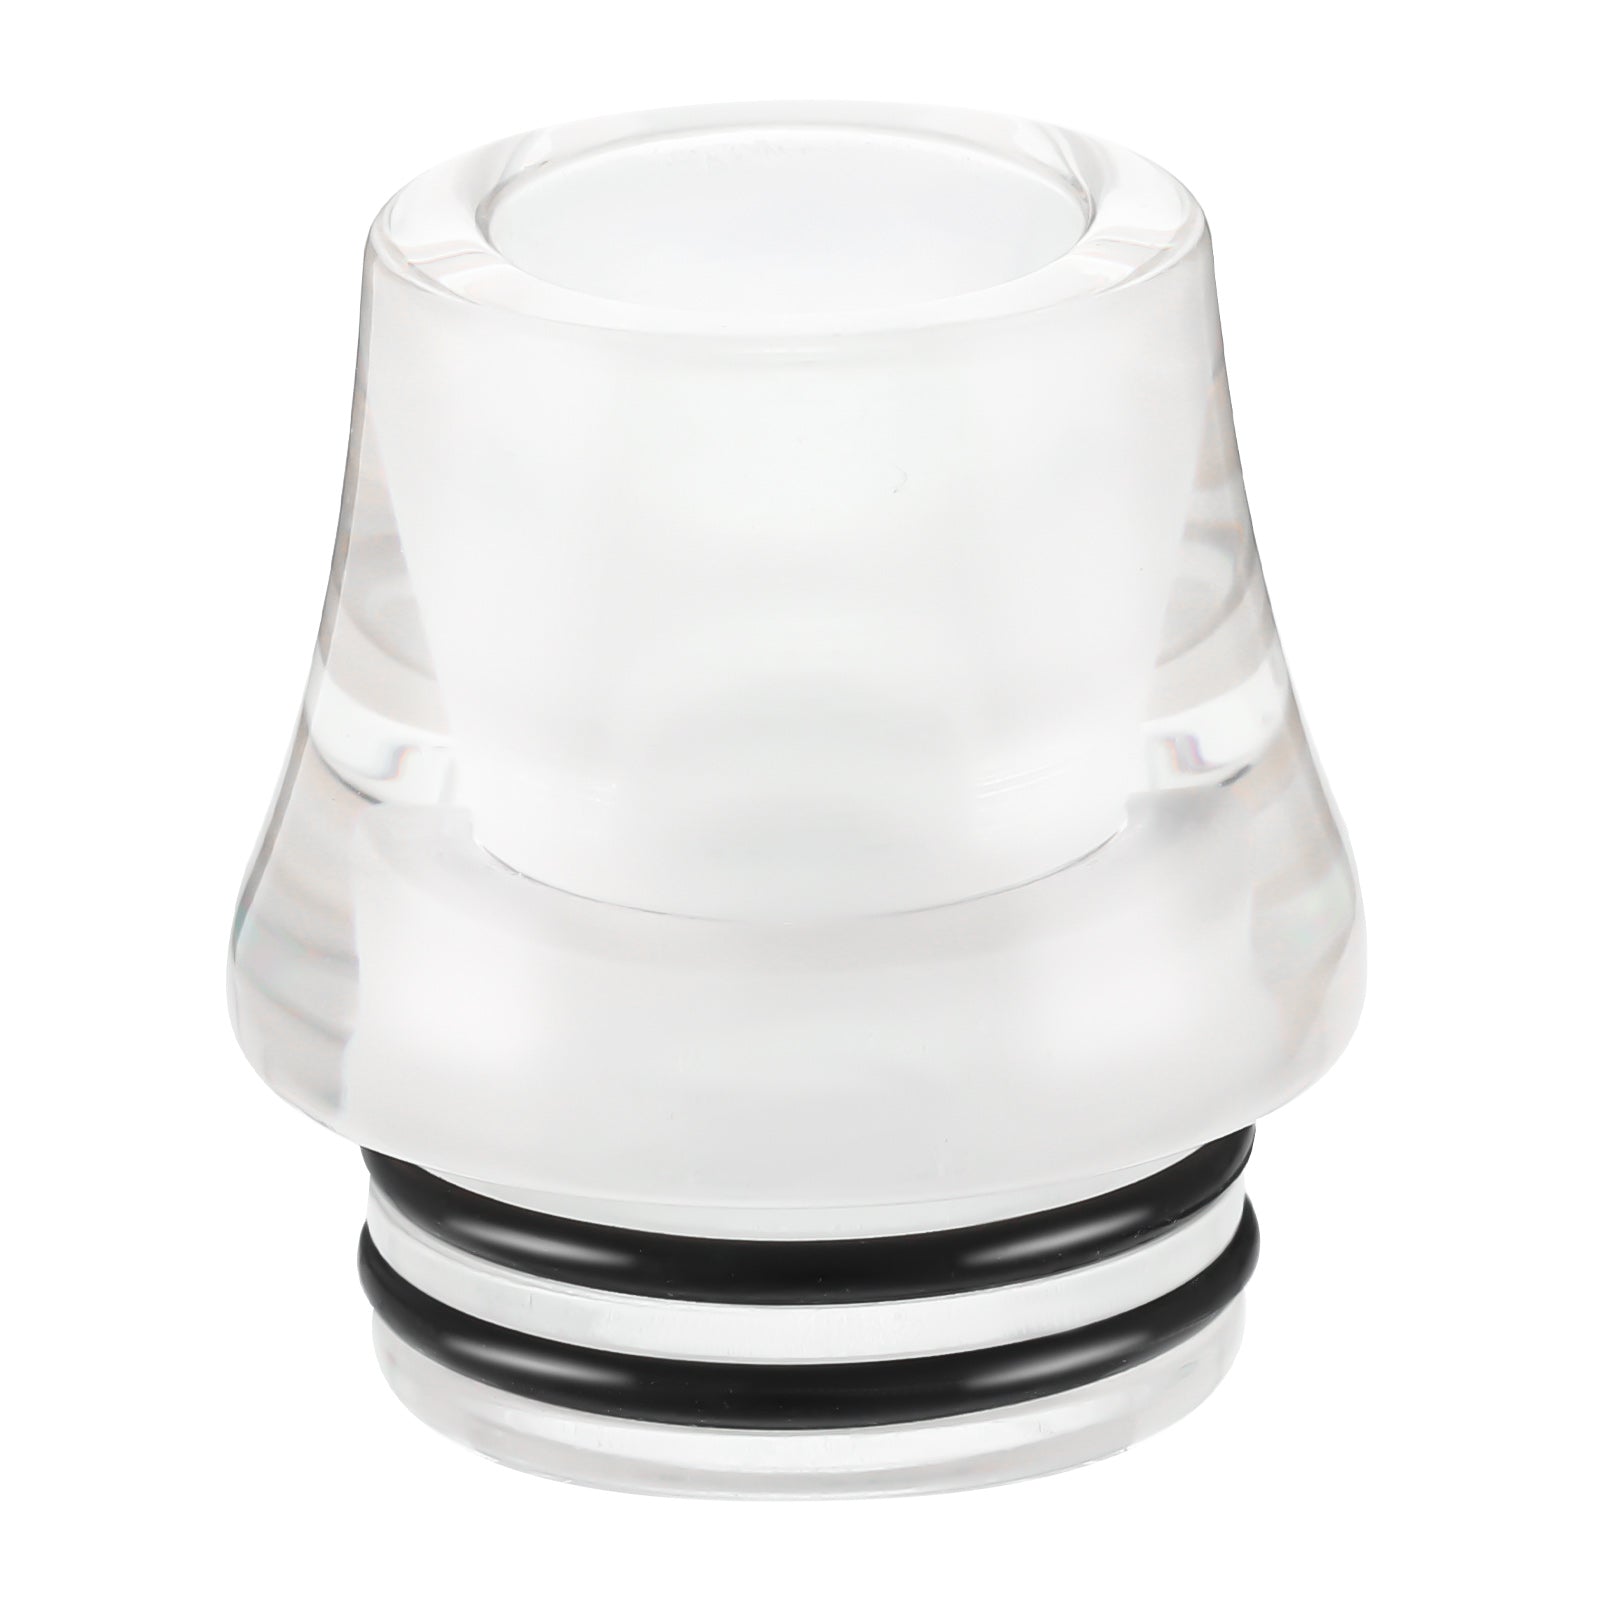 AS349 Resin 810 Drip Tip Mouthpiece 1pc Pack